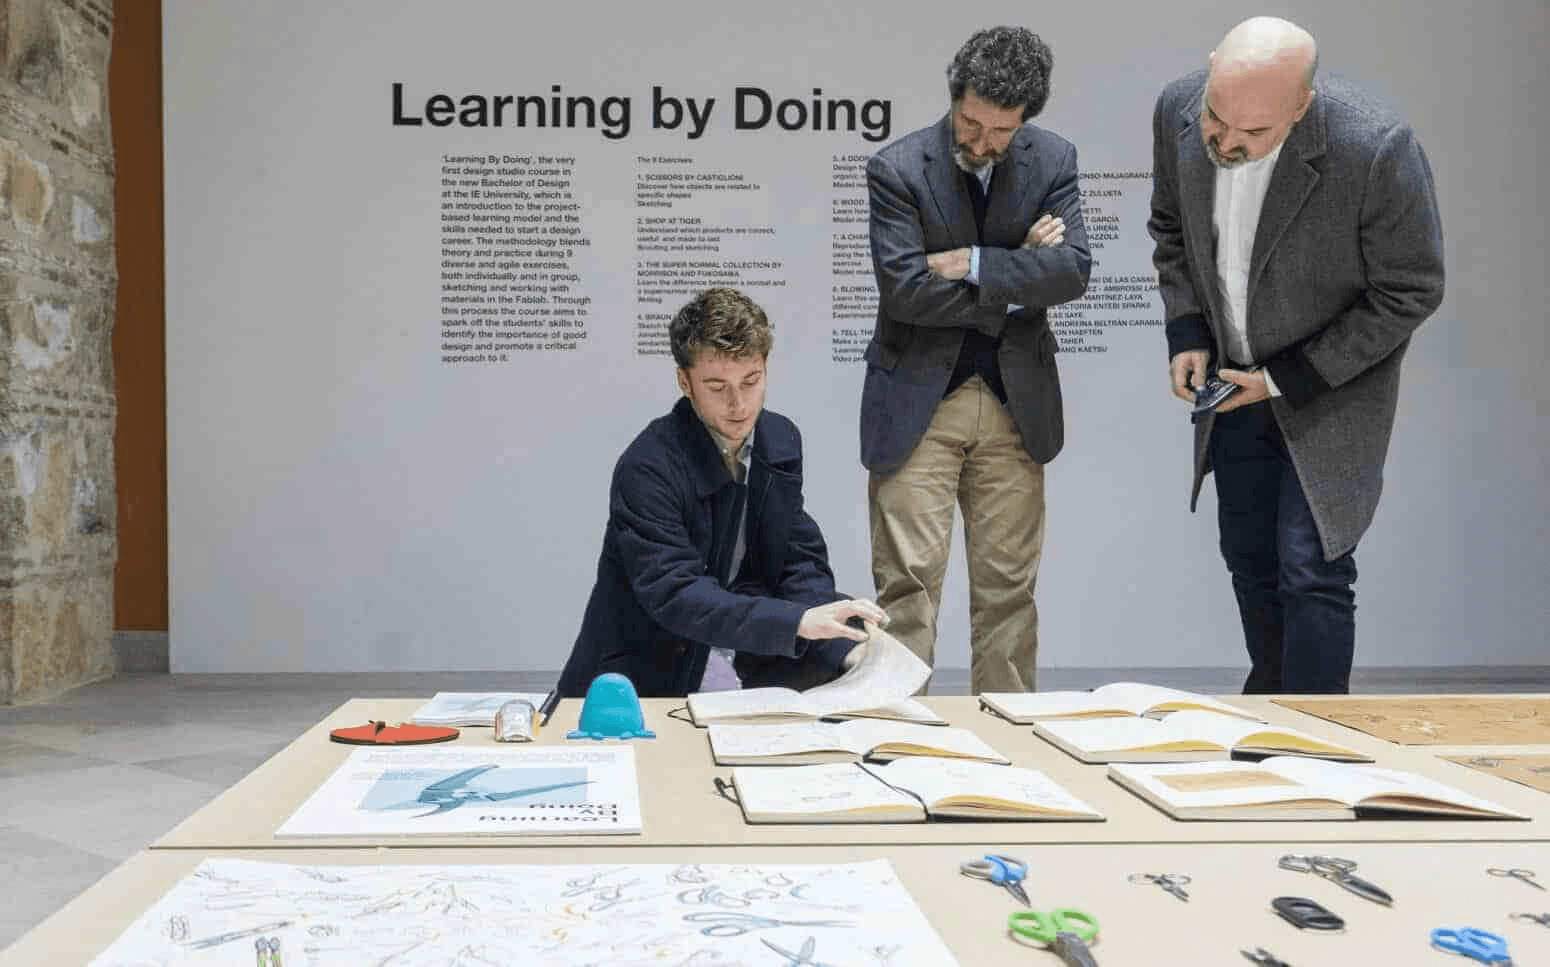 Learning by doing - Bachelor in Design | IE University